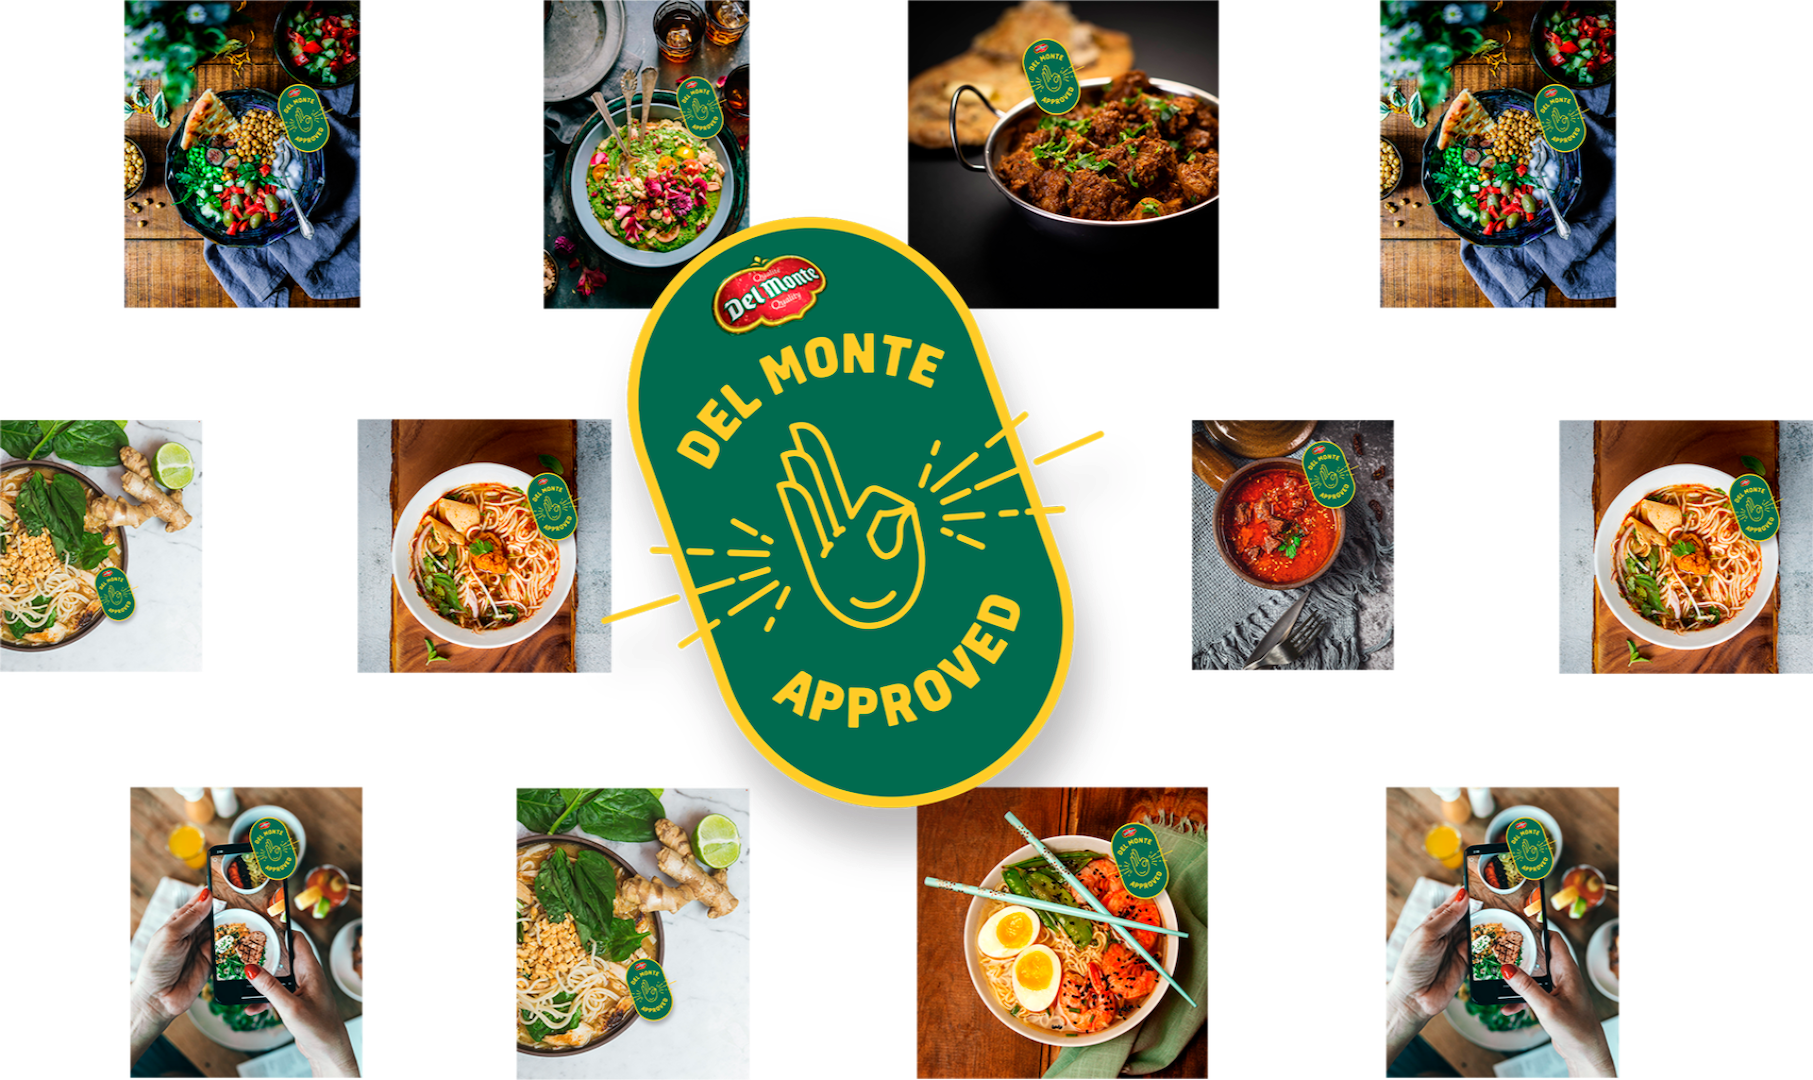 Delicious dishes approved by Del Monte